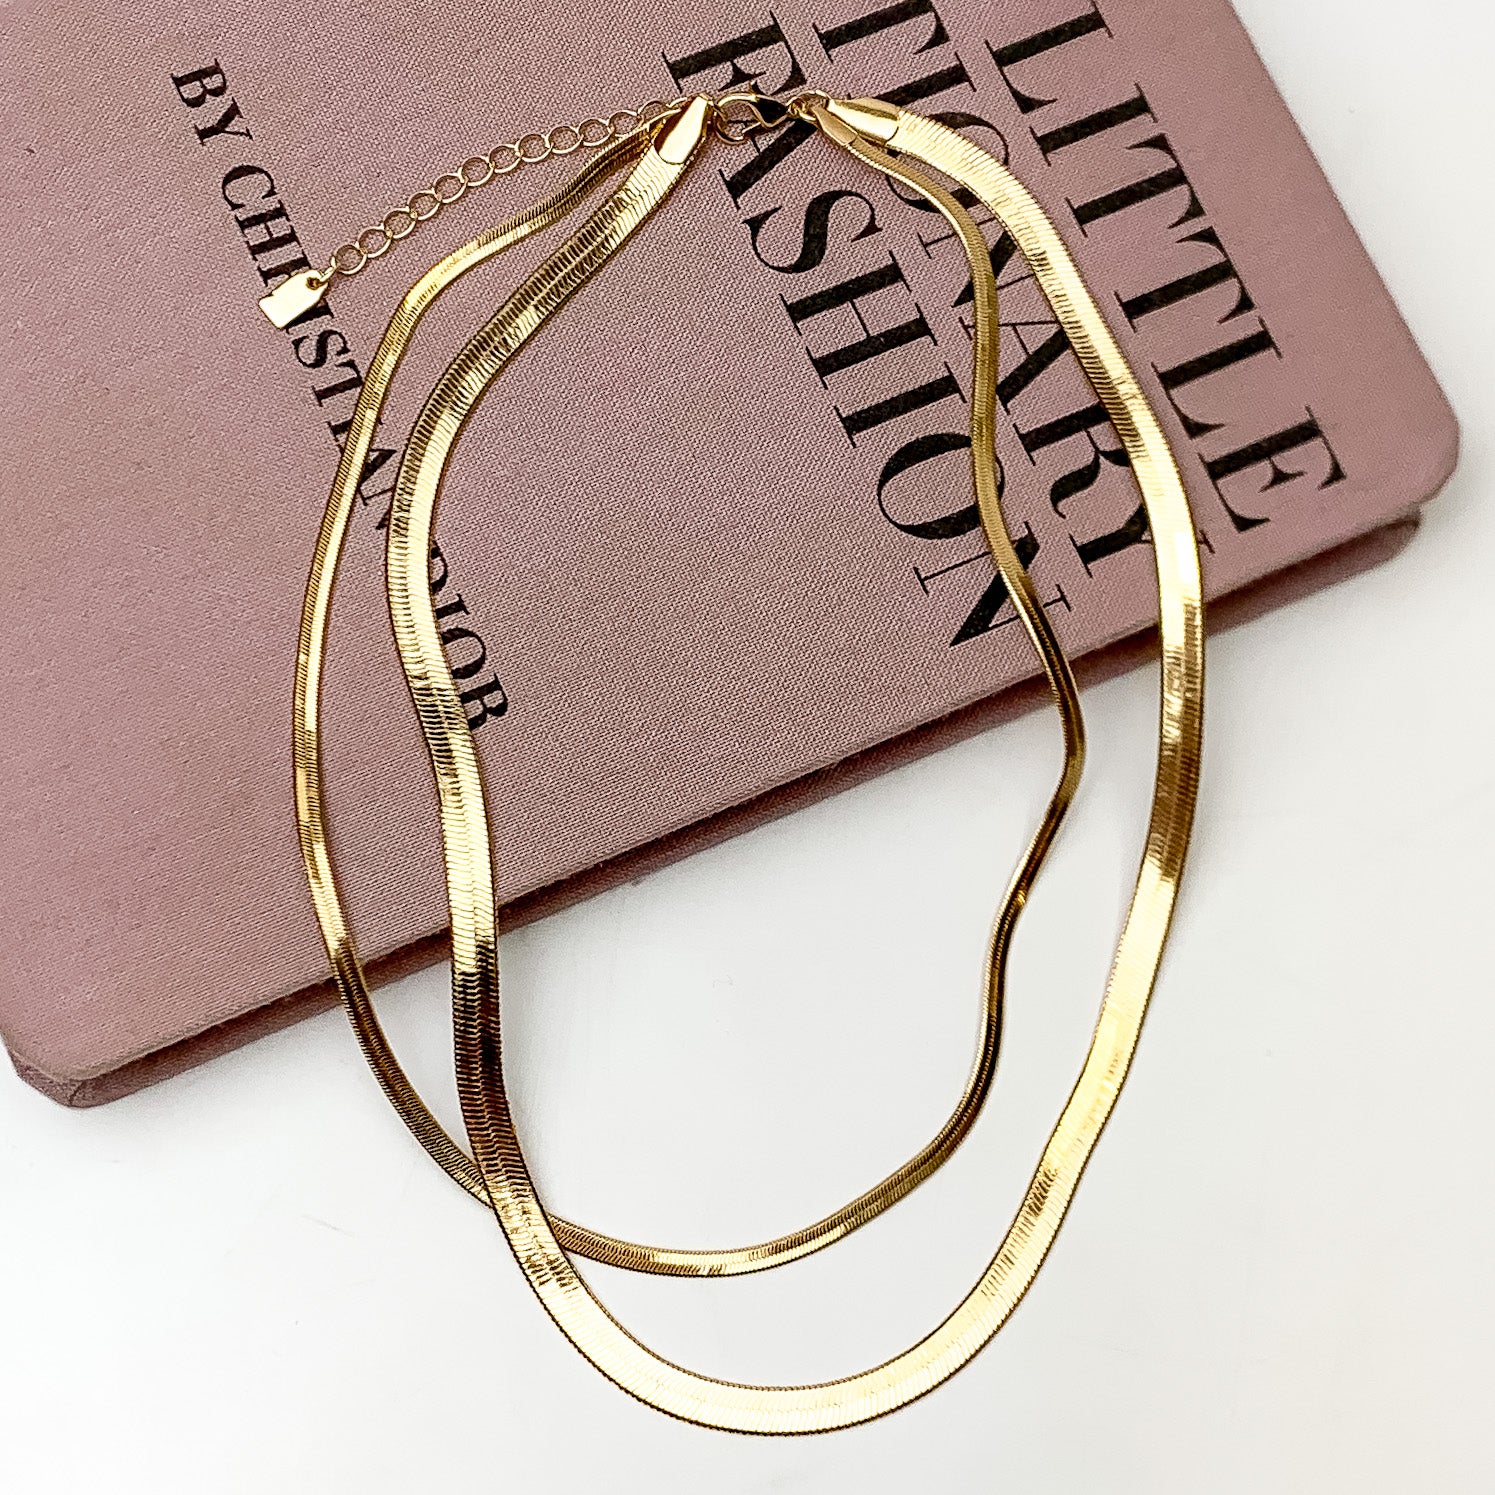 Pictured is a gold, two strand, herringbone chain necklace. This necklace is pictured laying partially on a mauve book on a white background.  